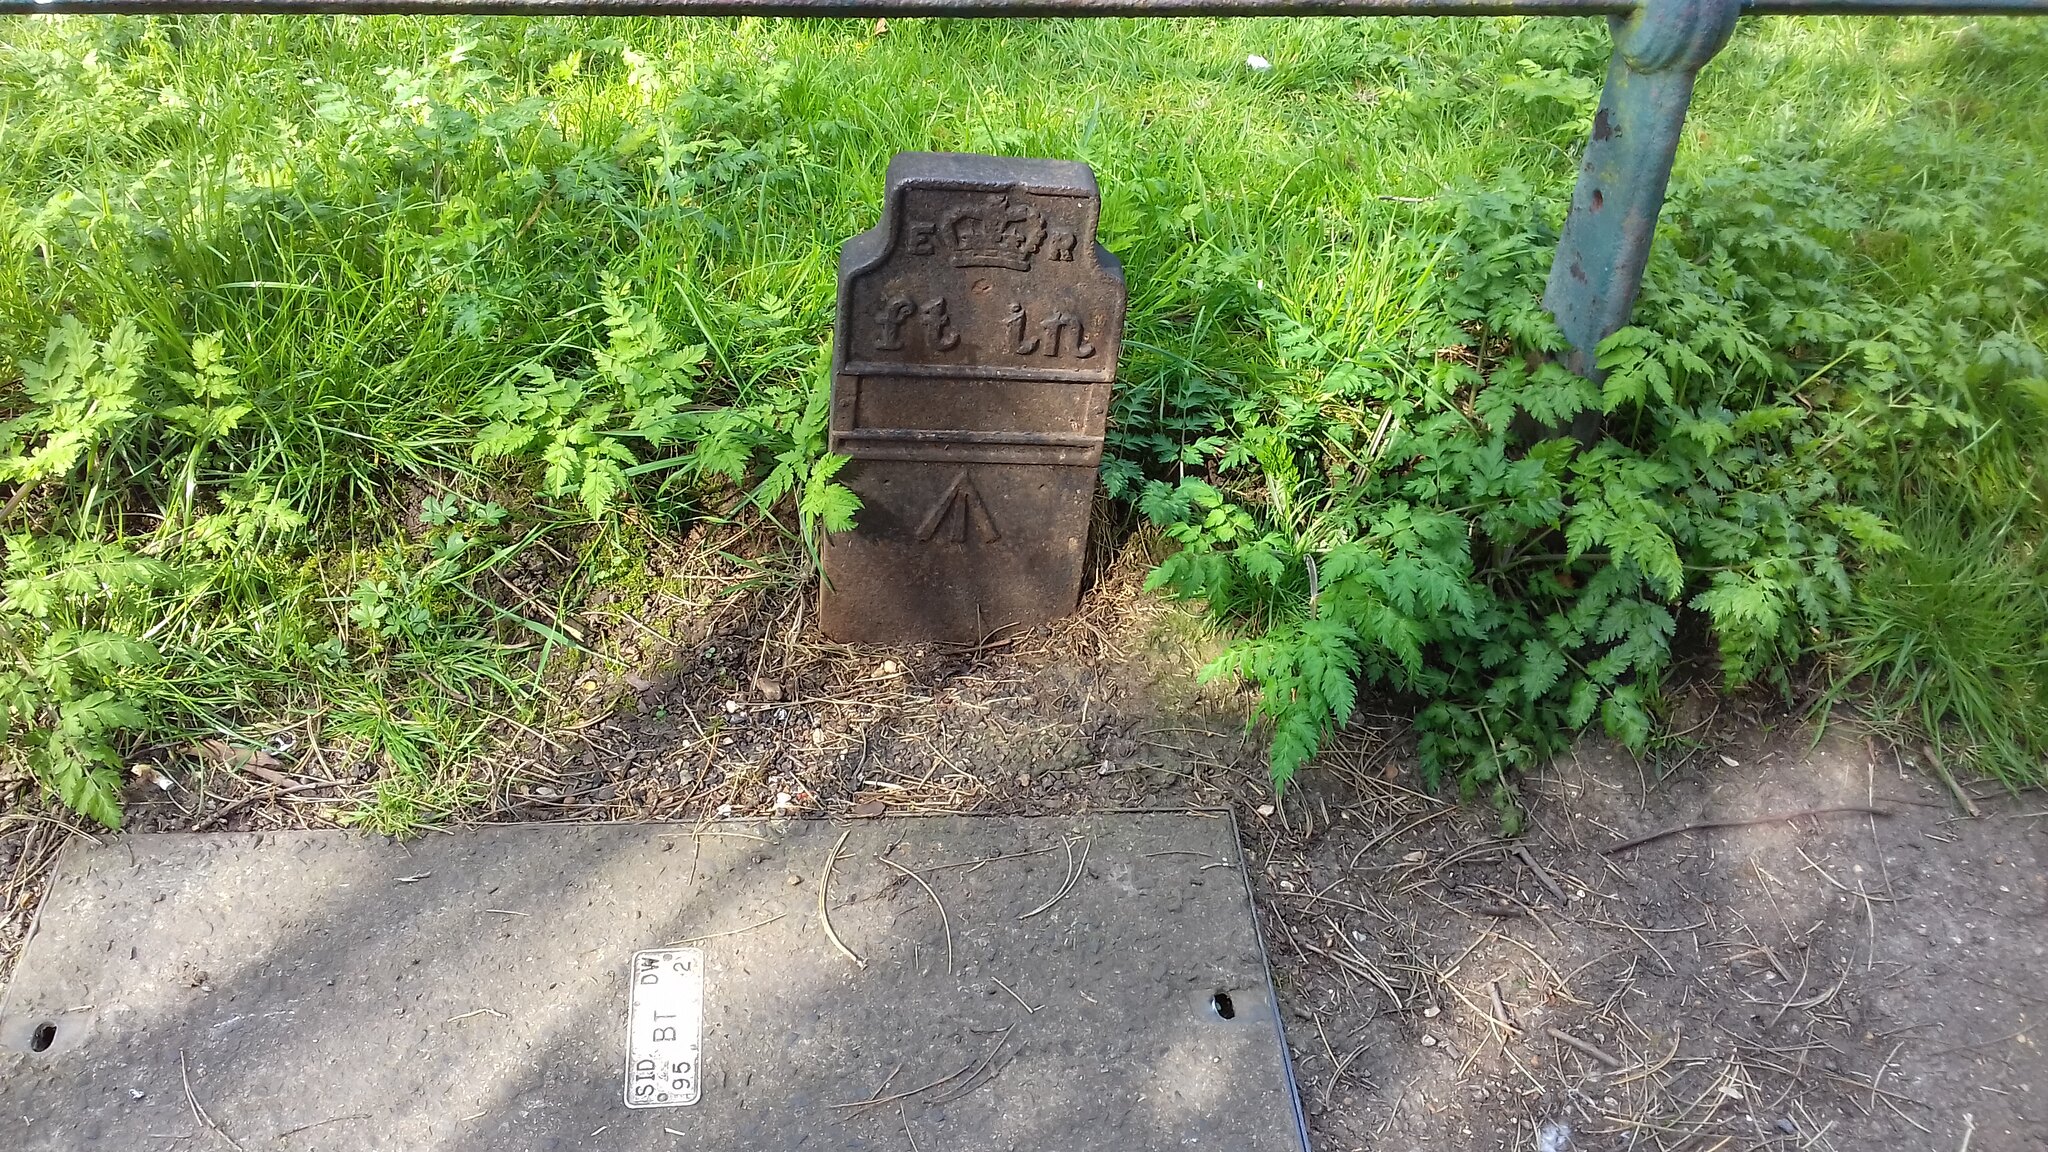 Telegraph cable marker post at New River Path, Wormley, Broxbourne by Peter Cousins 